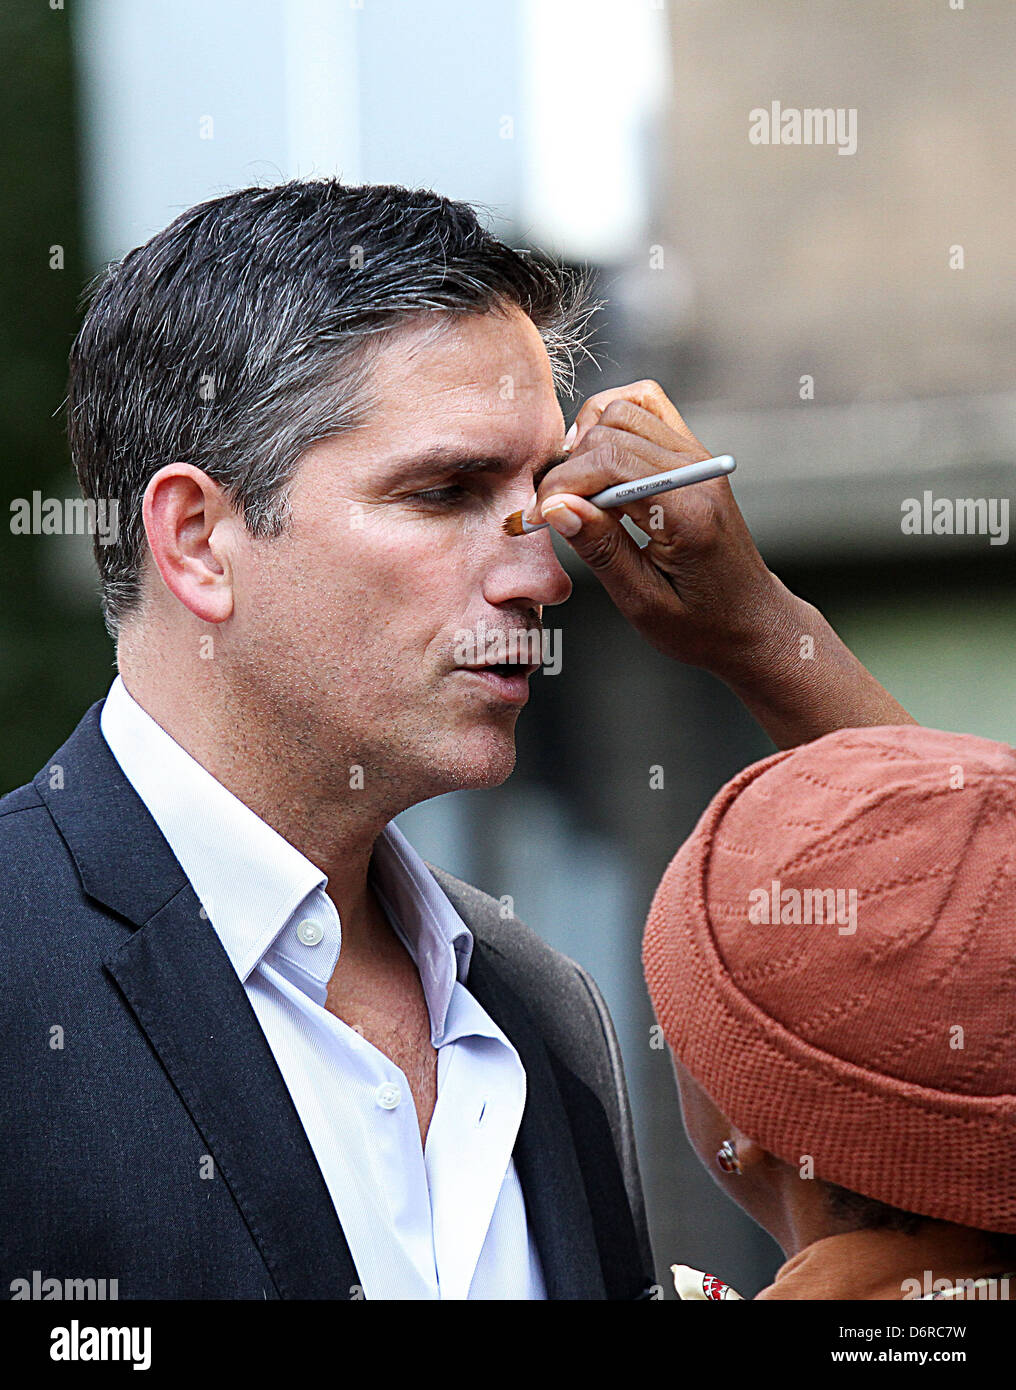 James Caviezel filming on the set of the new TV show 'Person of Interest' at Ebbets Field in Brooklyn New York City, USA - Stock Photo